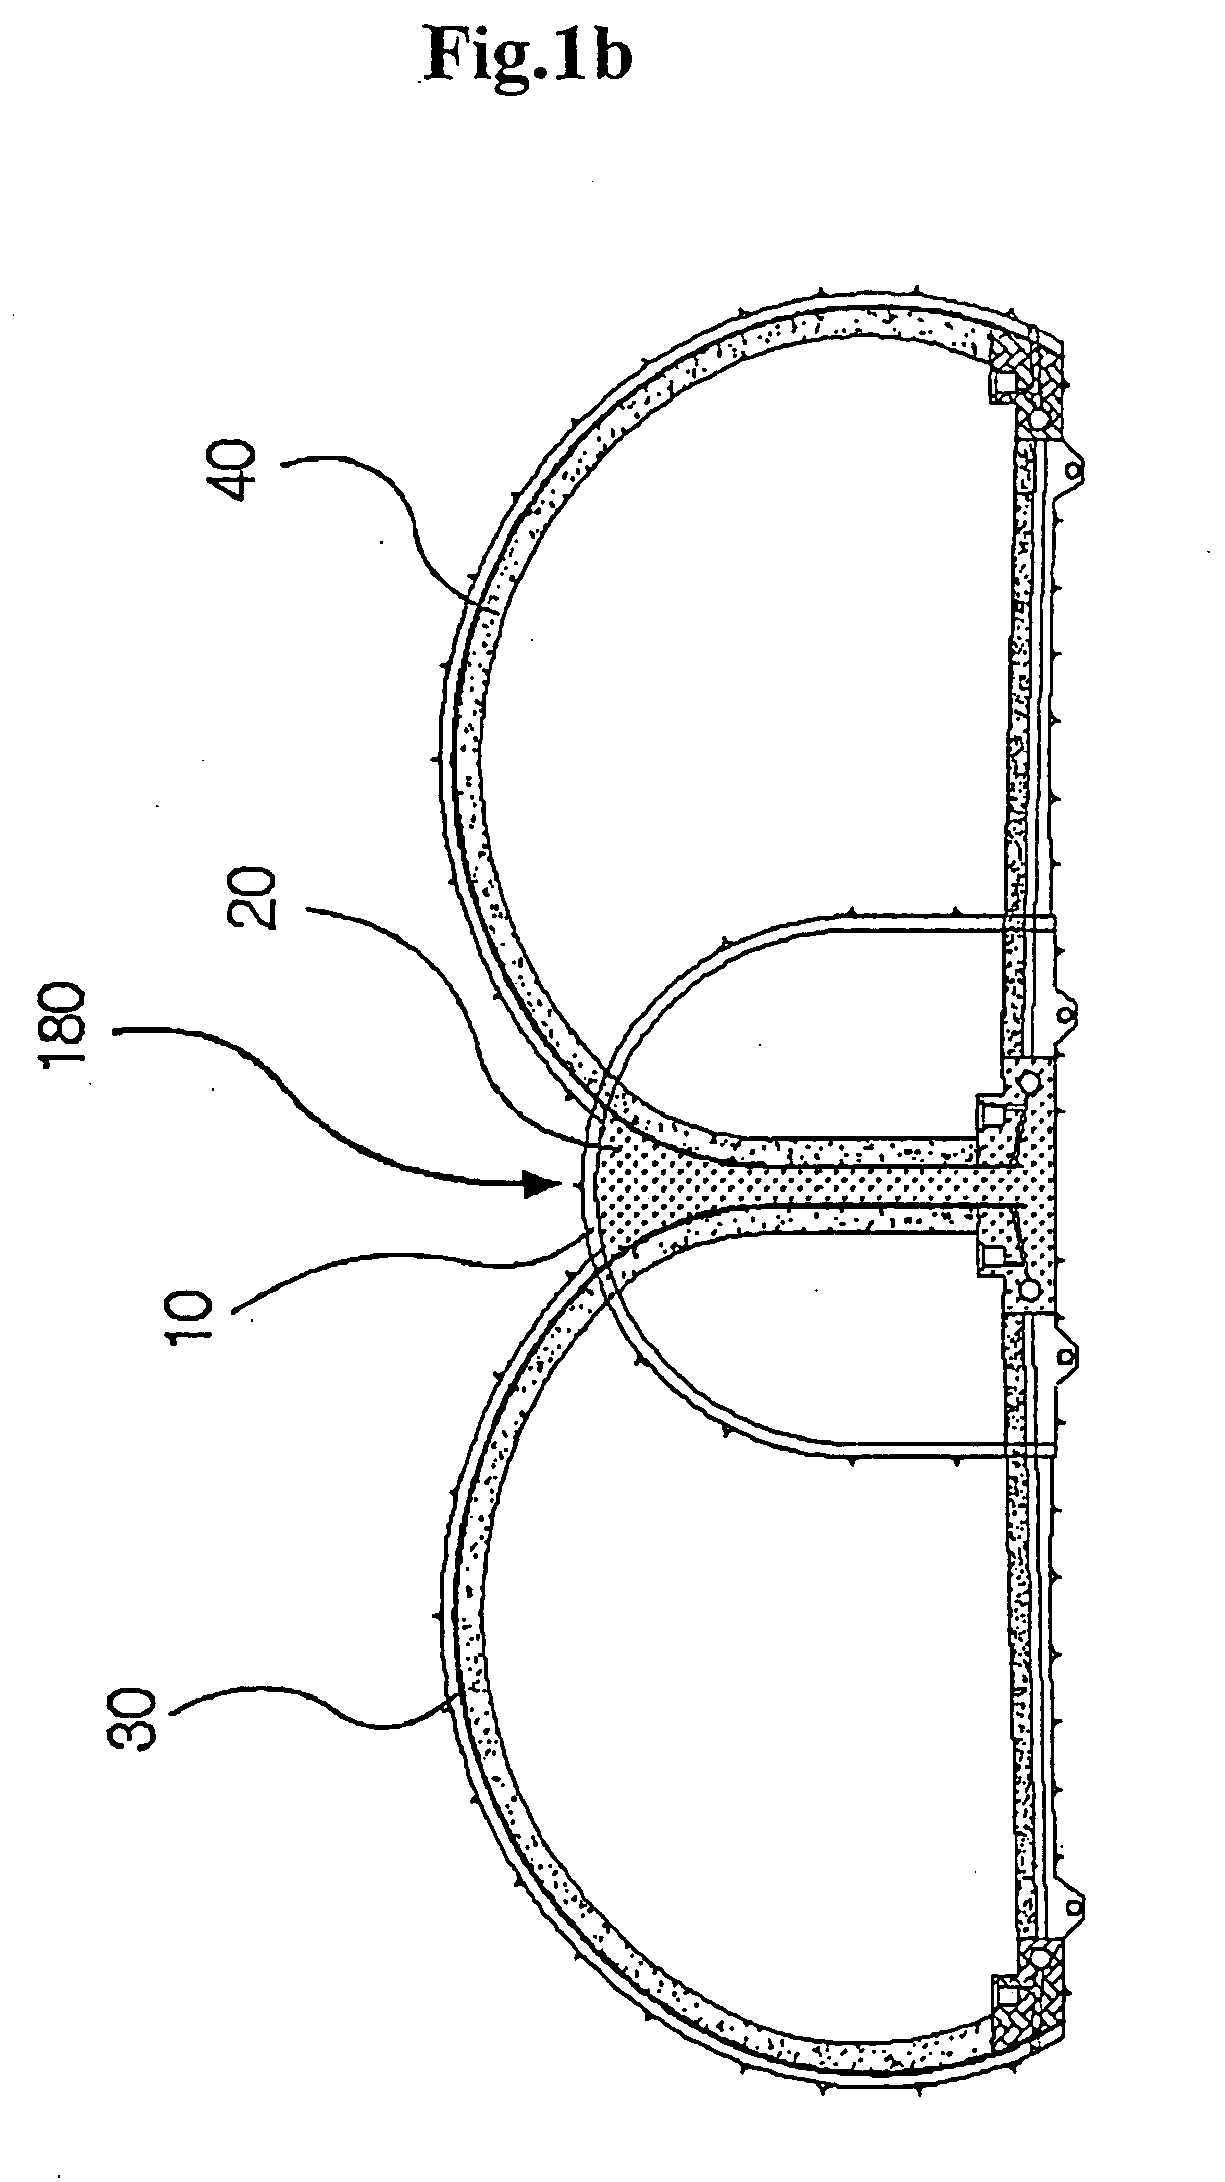 Structure of intermediate wall of three arch excavated tunnel and method for constructing the same